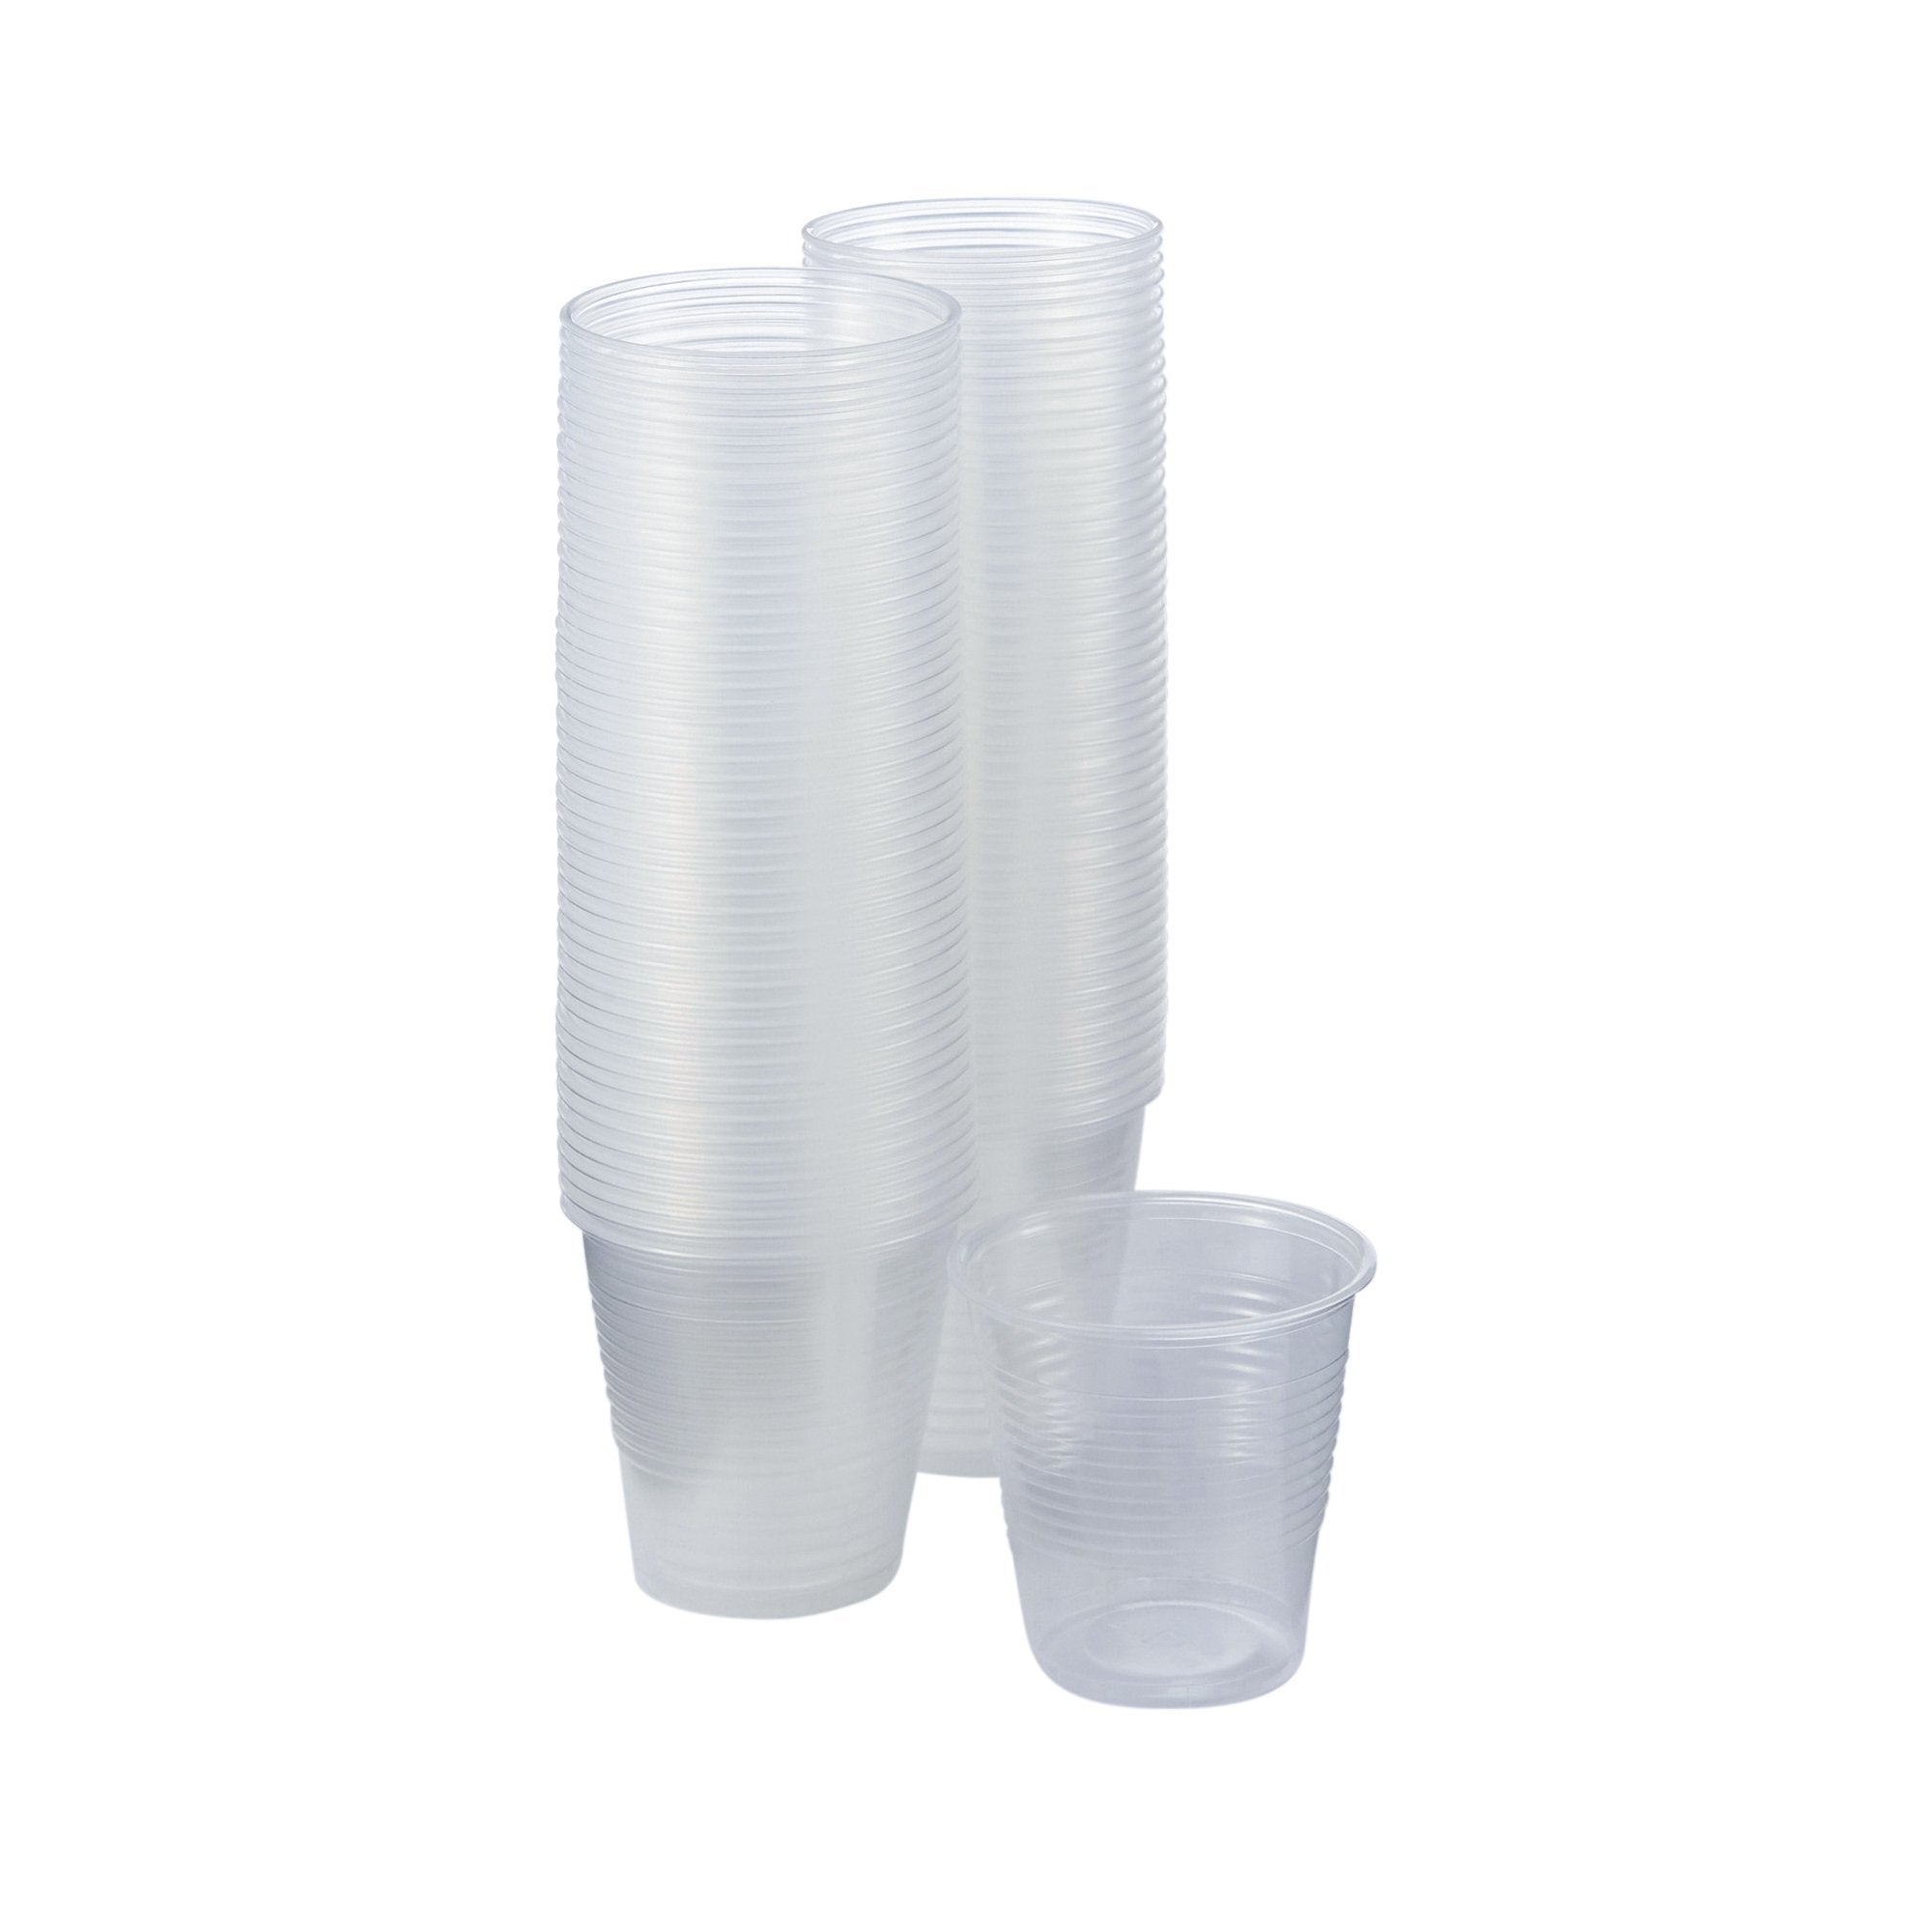 McKesson Clear Polypropylene Disposable Drinking Cups 5 oz - Bulk Pack (2000 Units)